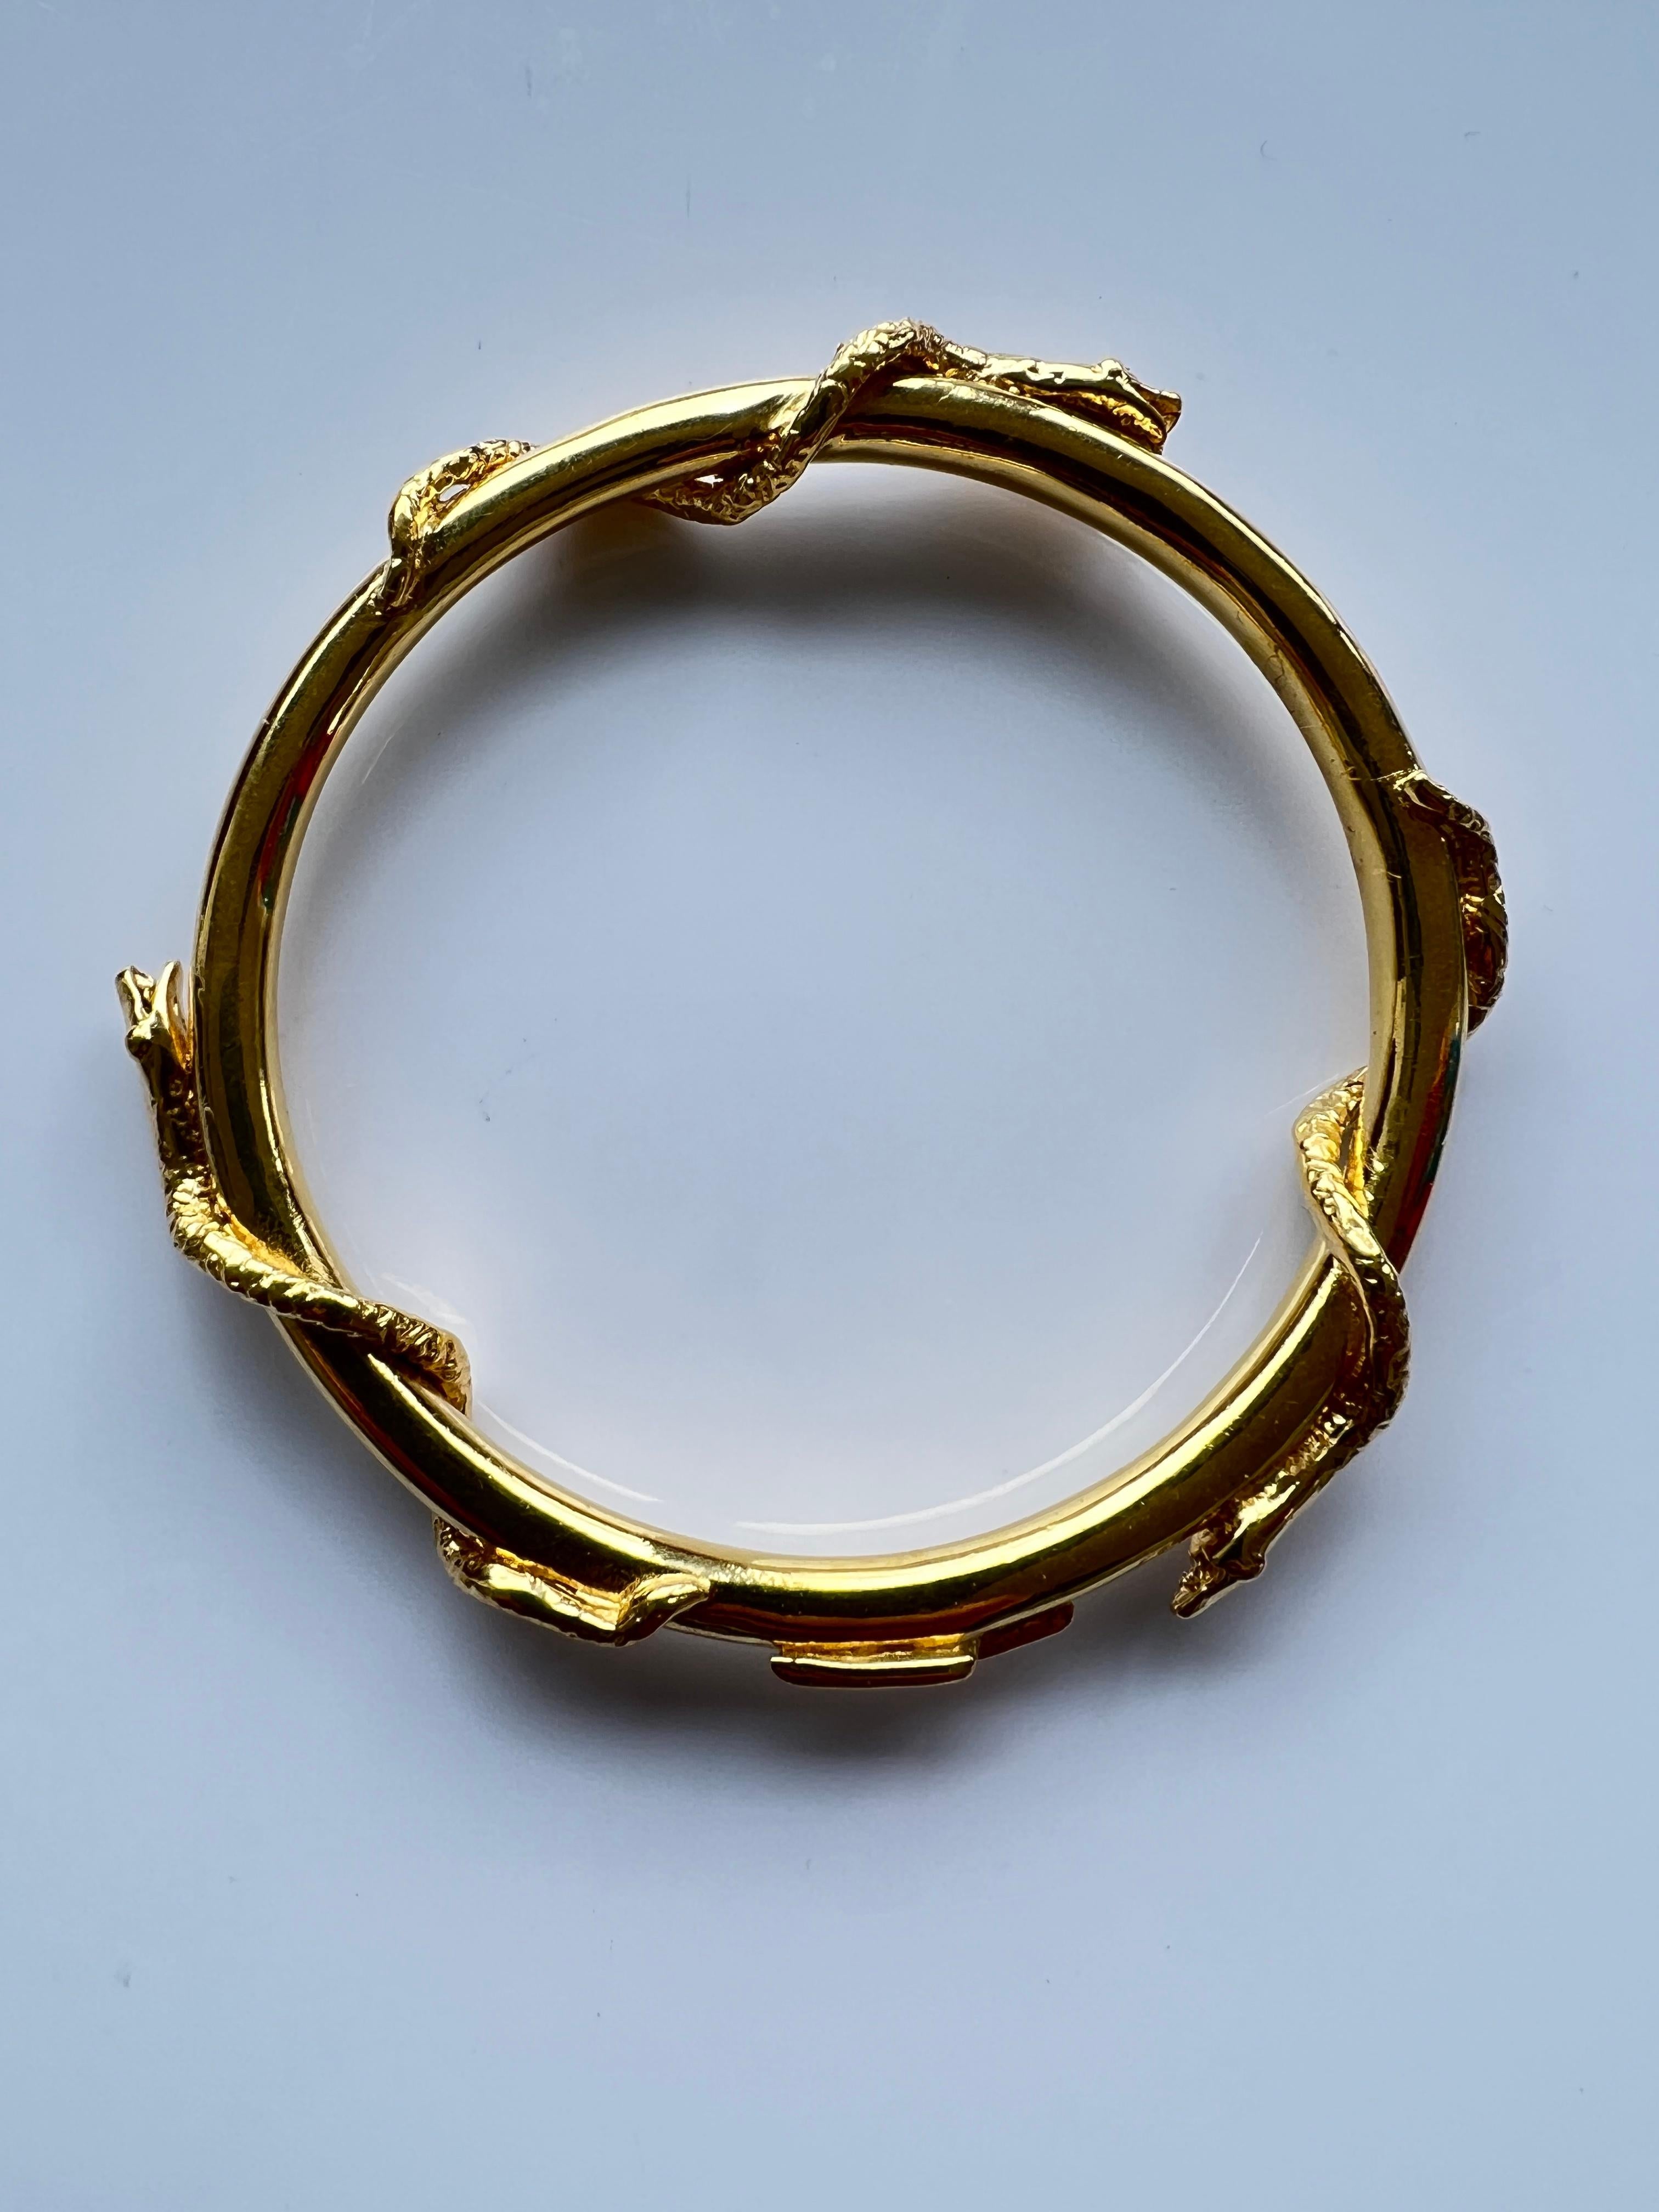 Snake Bangle Bracelet Victorian Style Gold Plated J Dauphin In New Condition For Sale In Los Angeles, CA